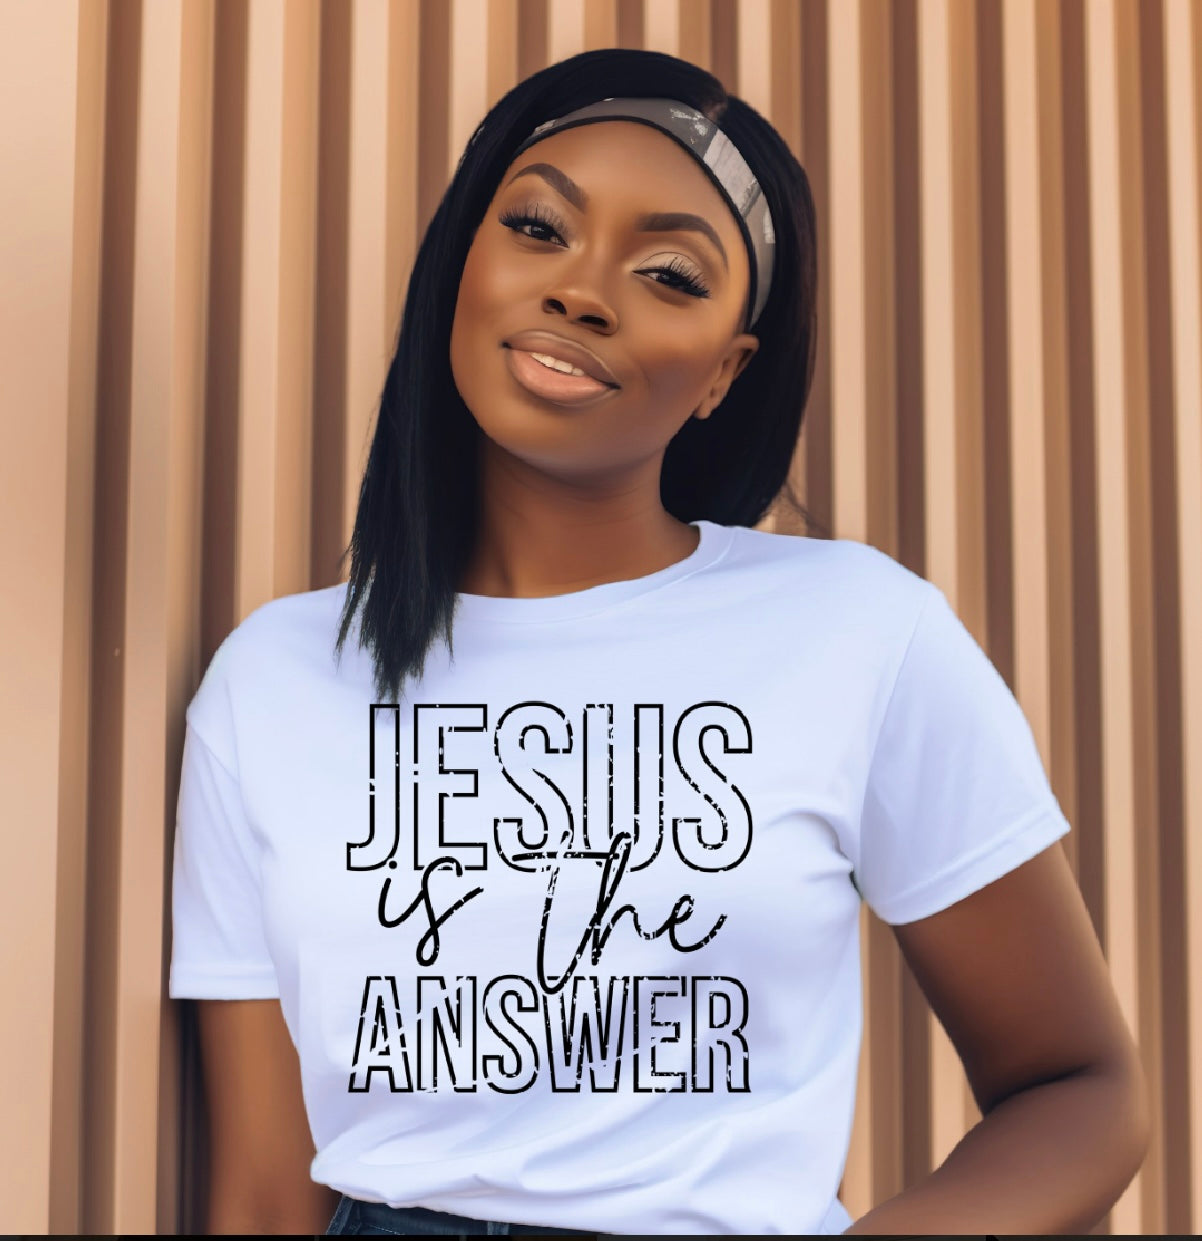 Jesus Is The Answer T-Shirt